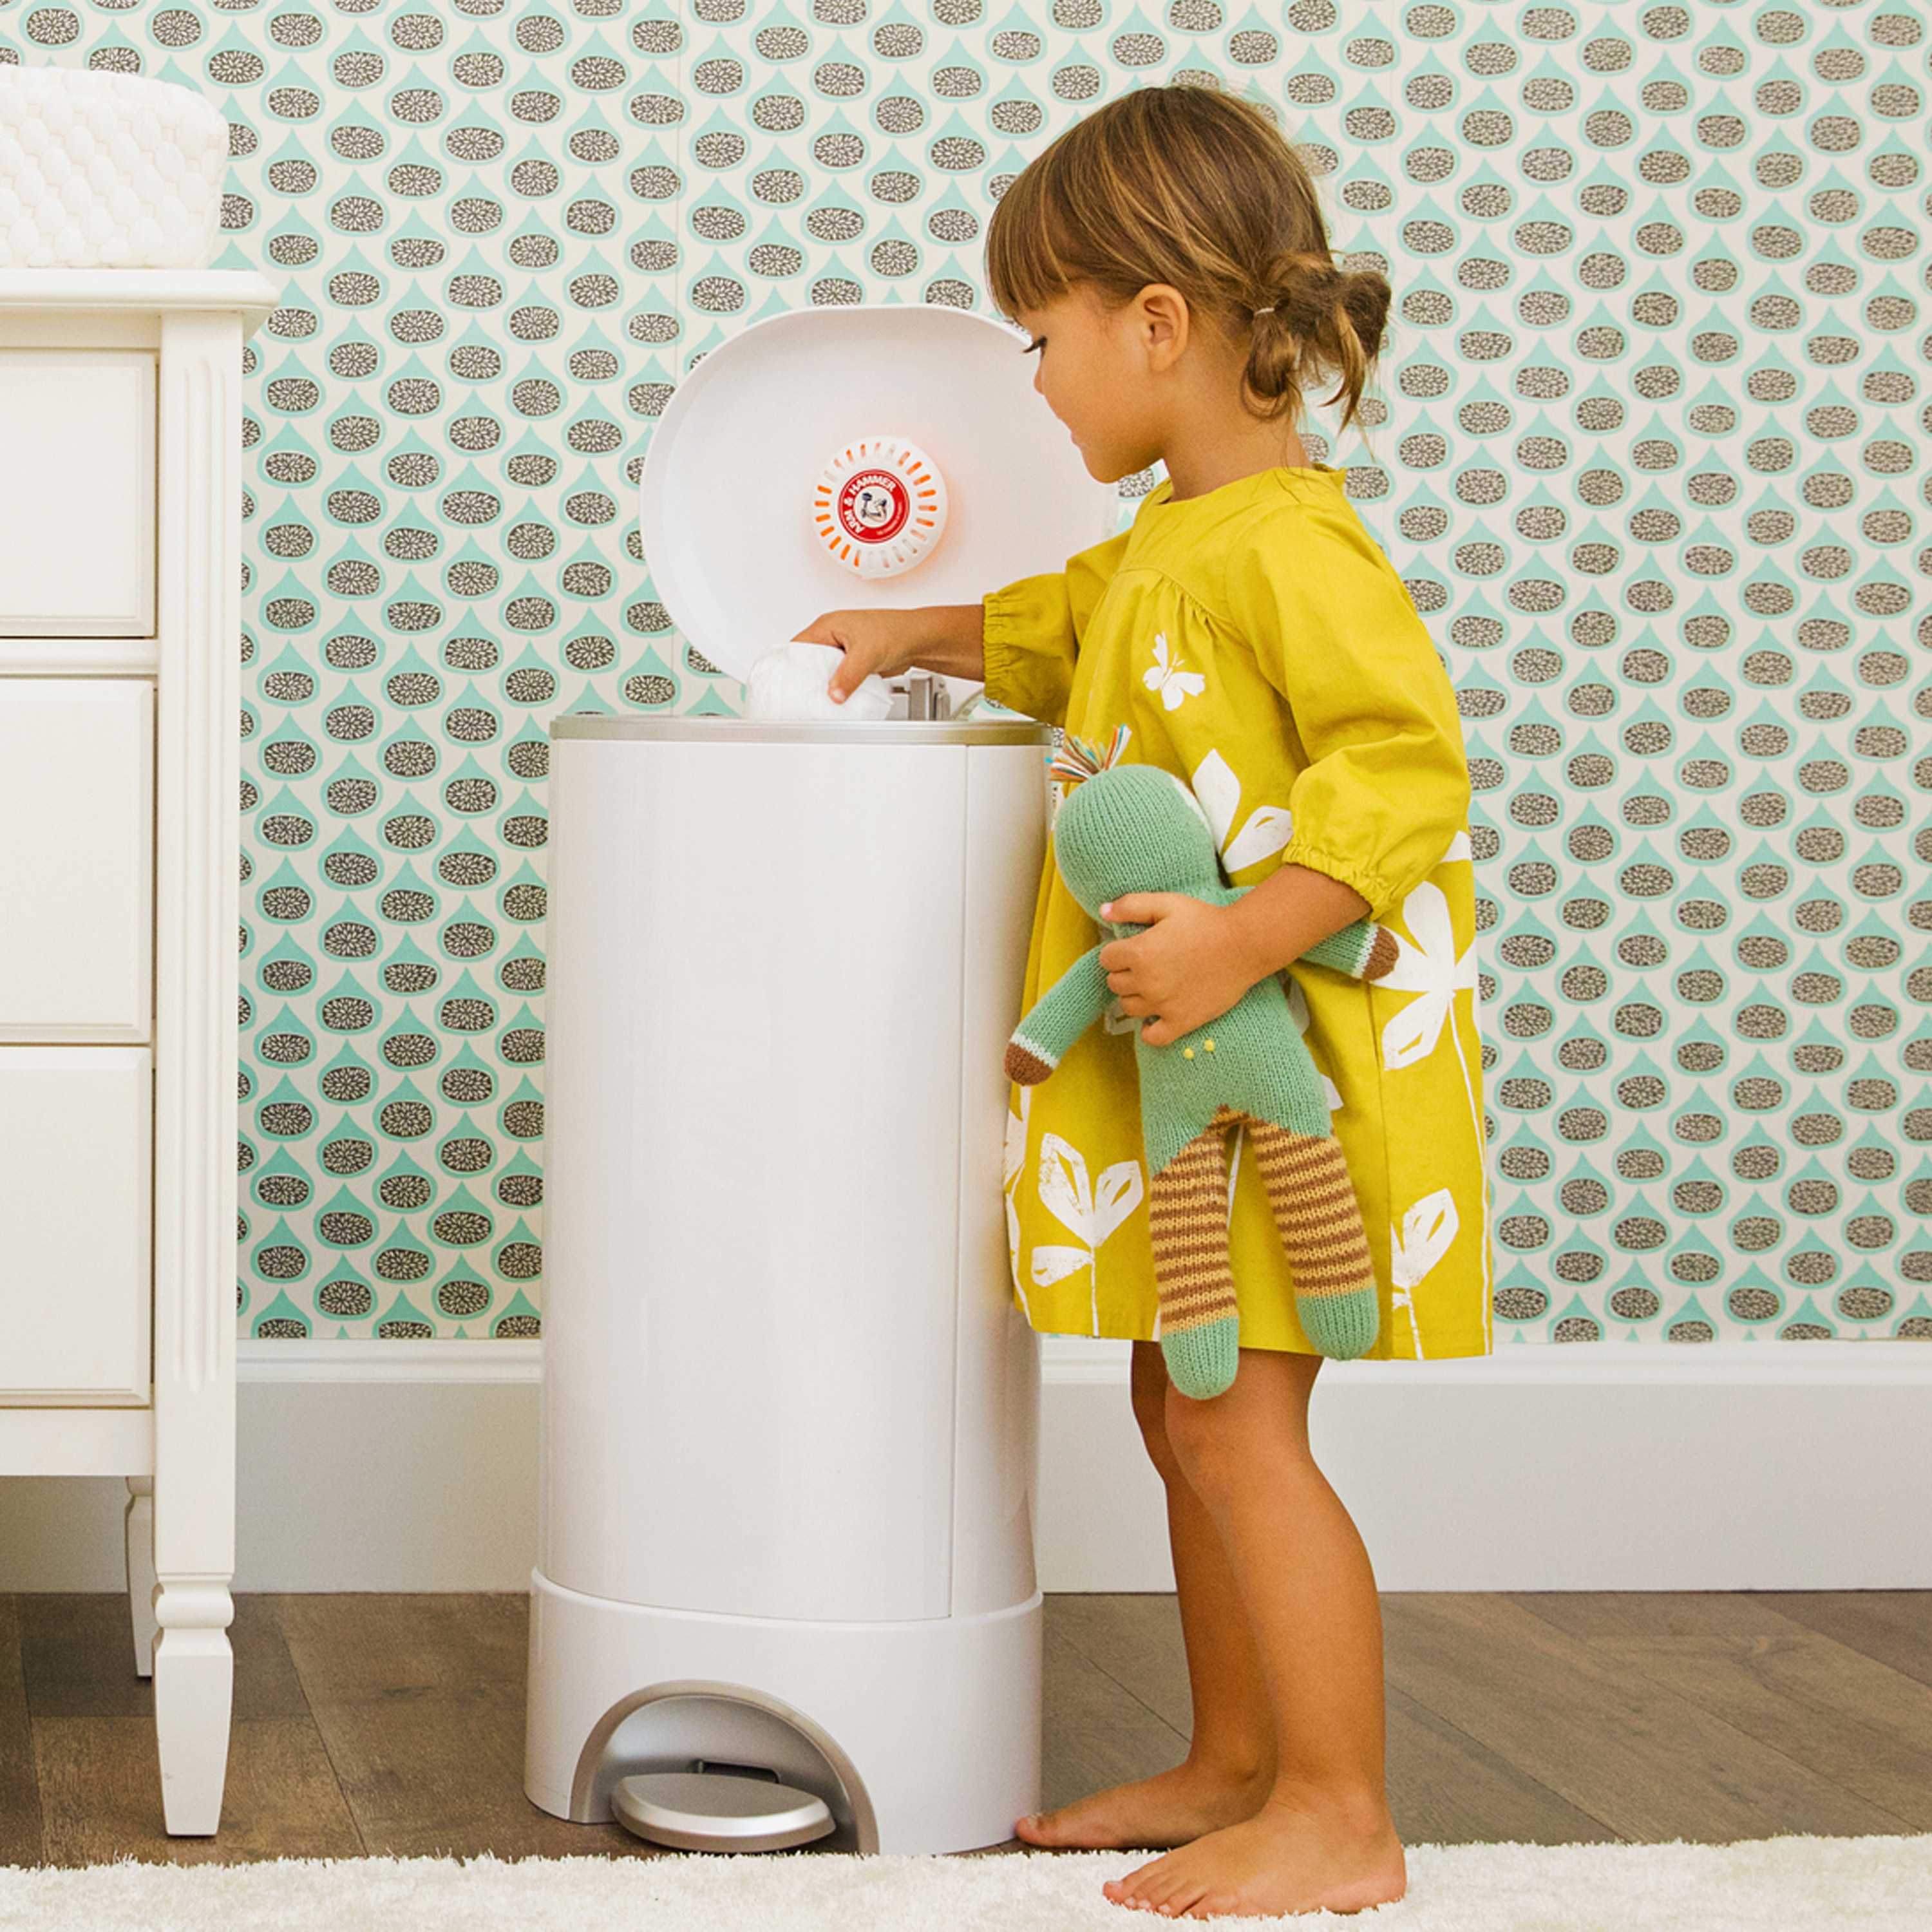 Munchkin® STEP™ Baby Diaper Pail, Powered by Arm & Hammer™, White - image 4 of 14